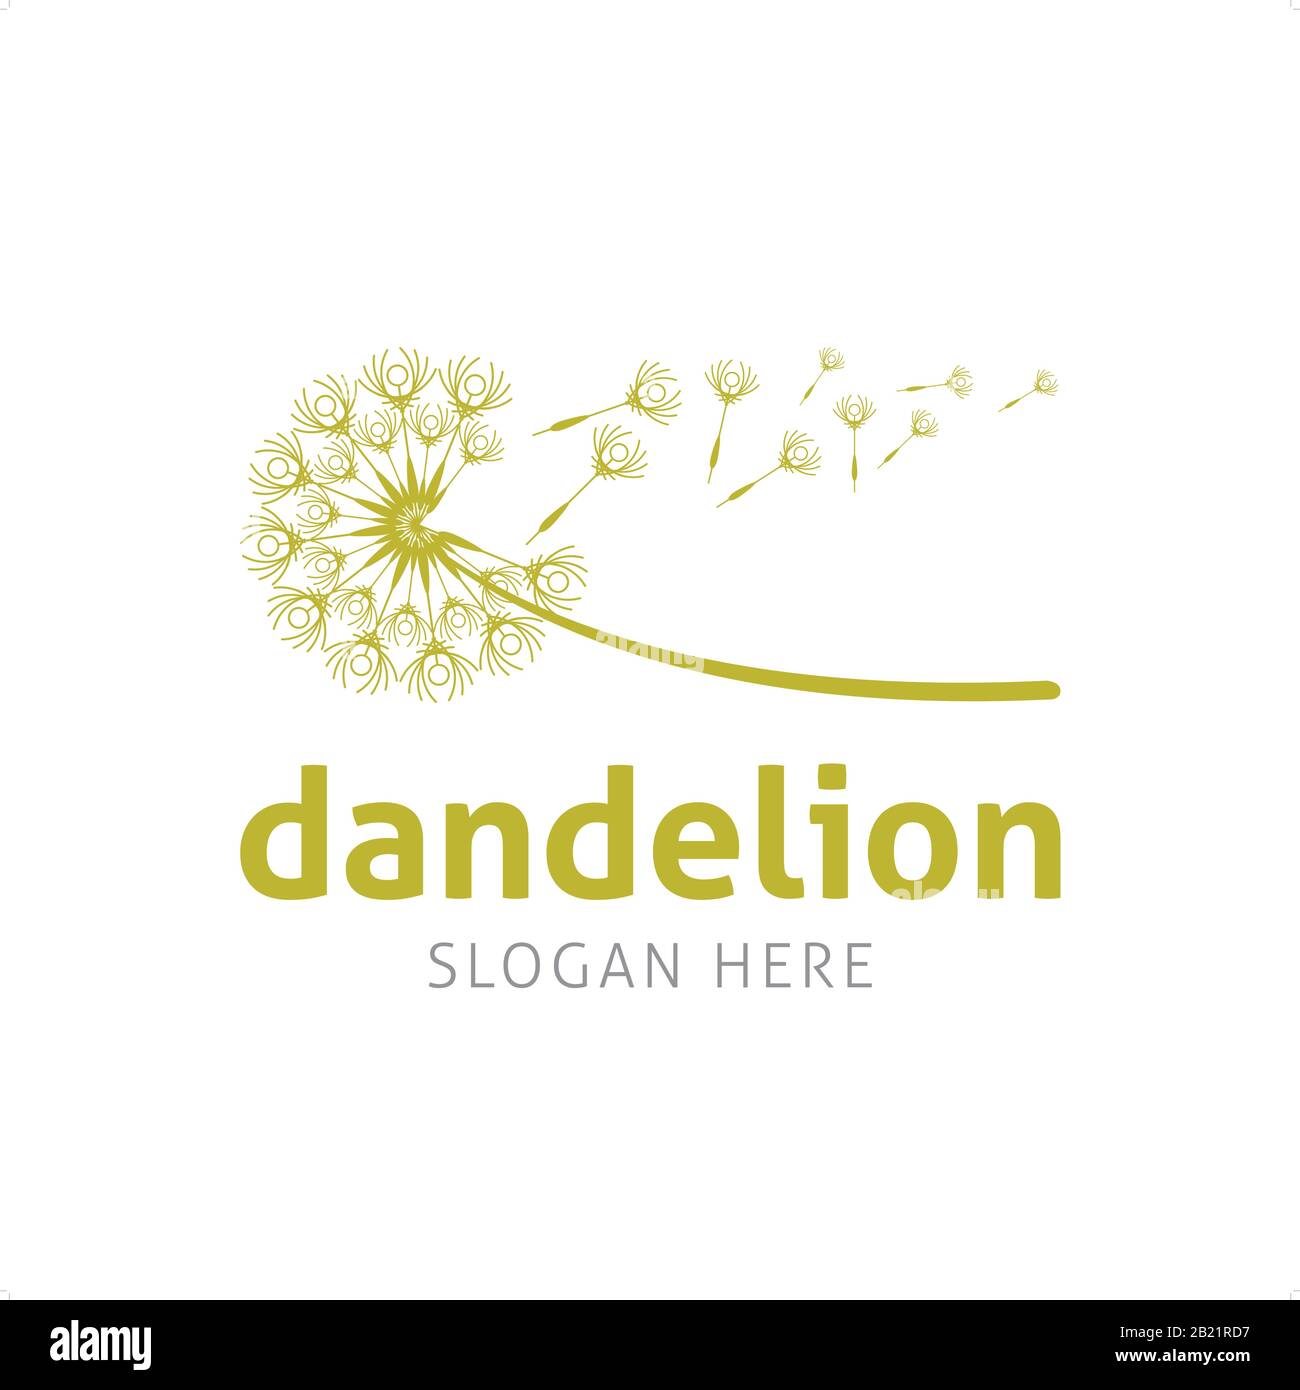 Blowing dandelion flower vector best for marketing strategy company logo, spiritual service, healthcare, investment company logo. Stock Vector